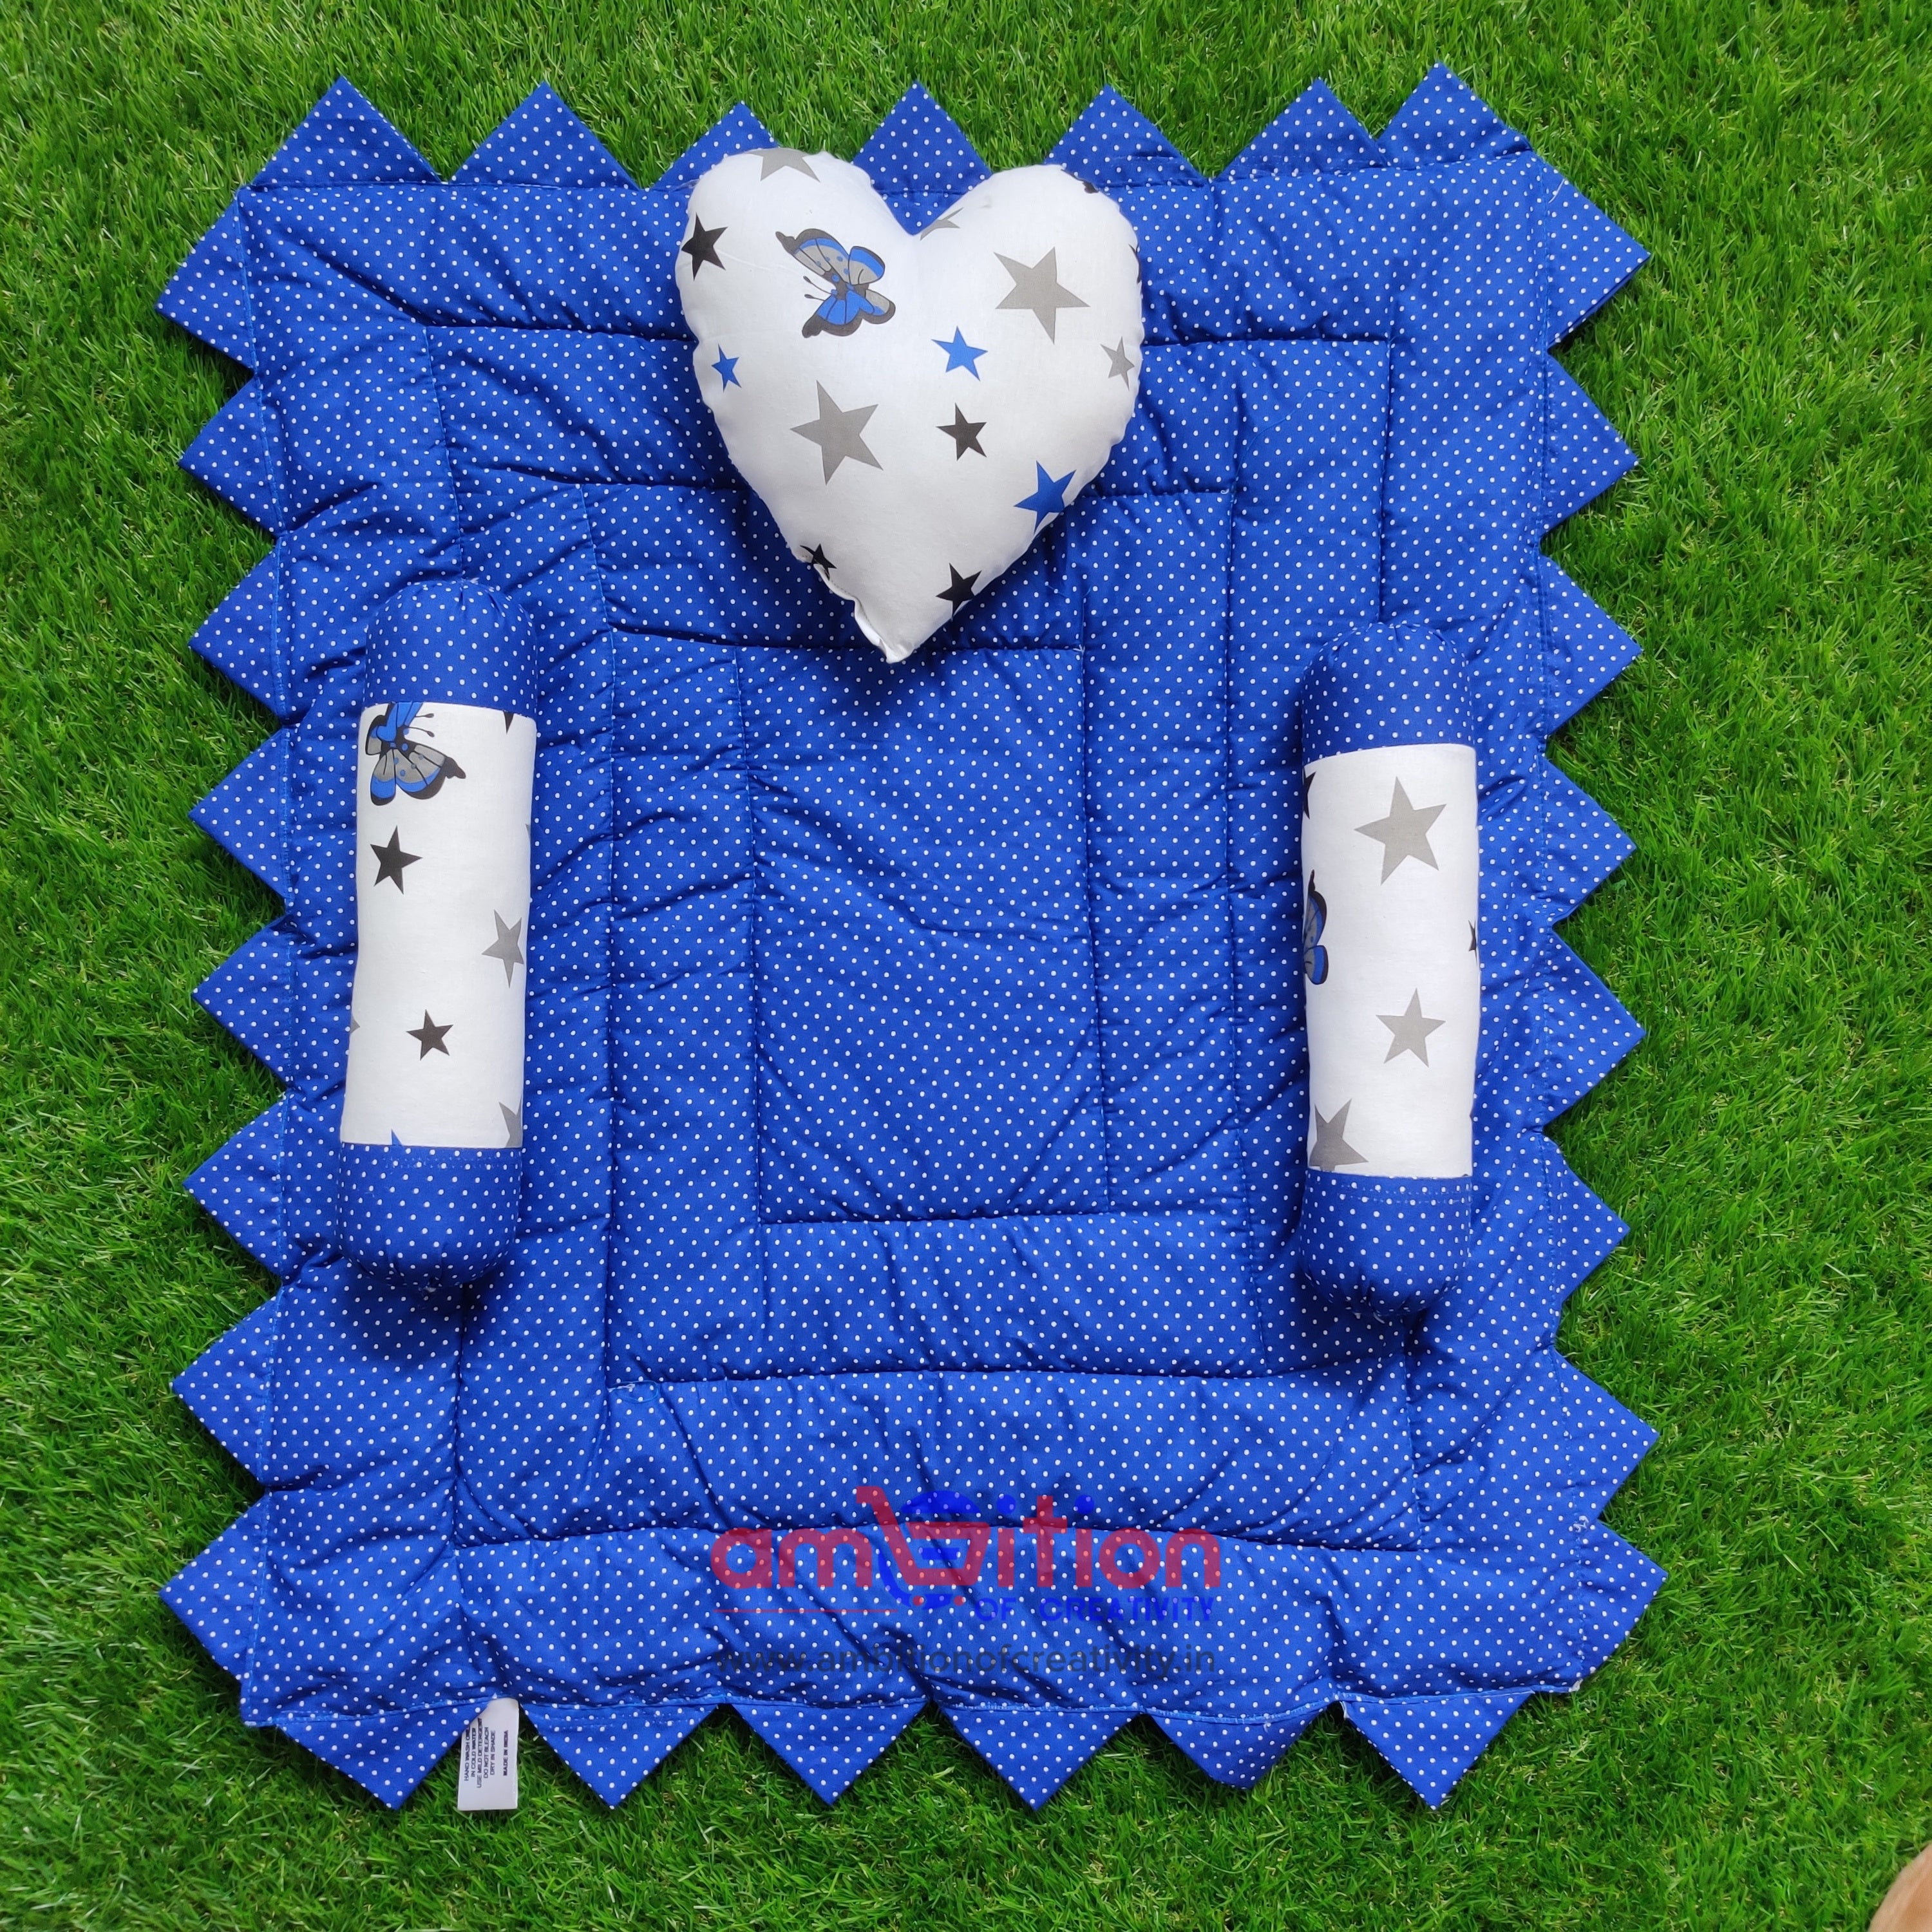 Small baby bed , Reversible Comfortable for Newborn to Toddlers